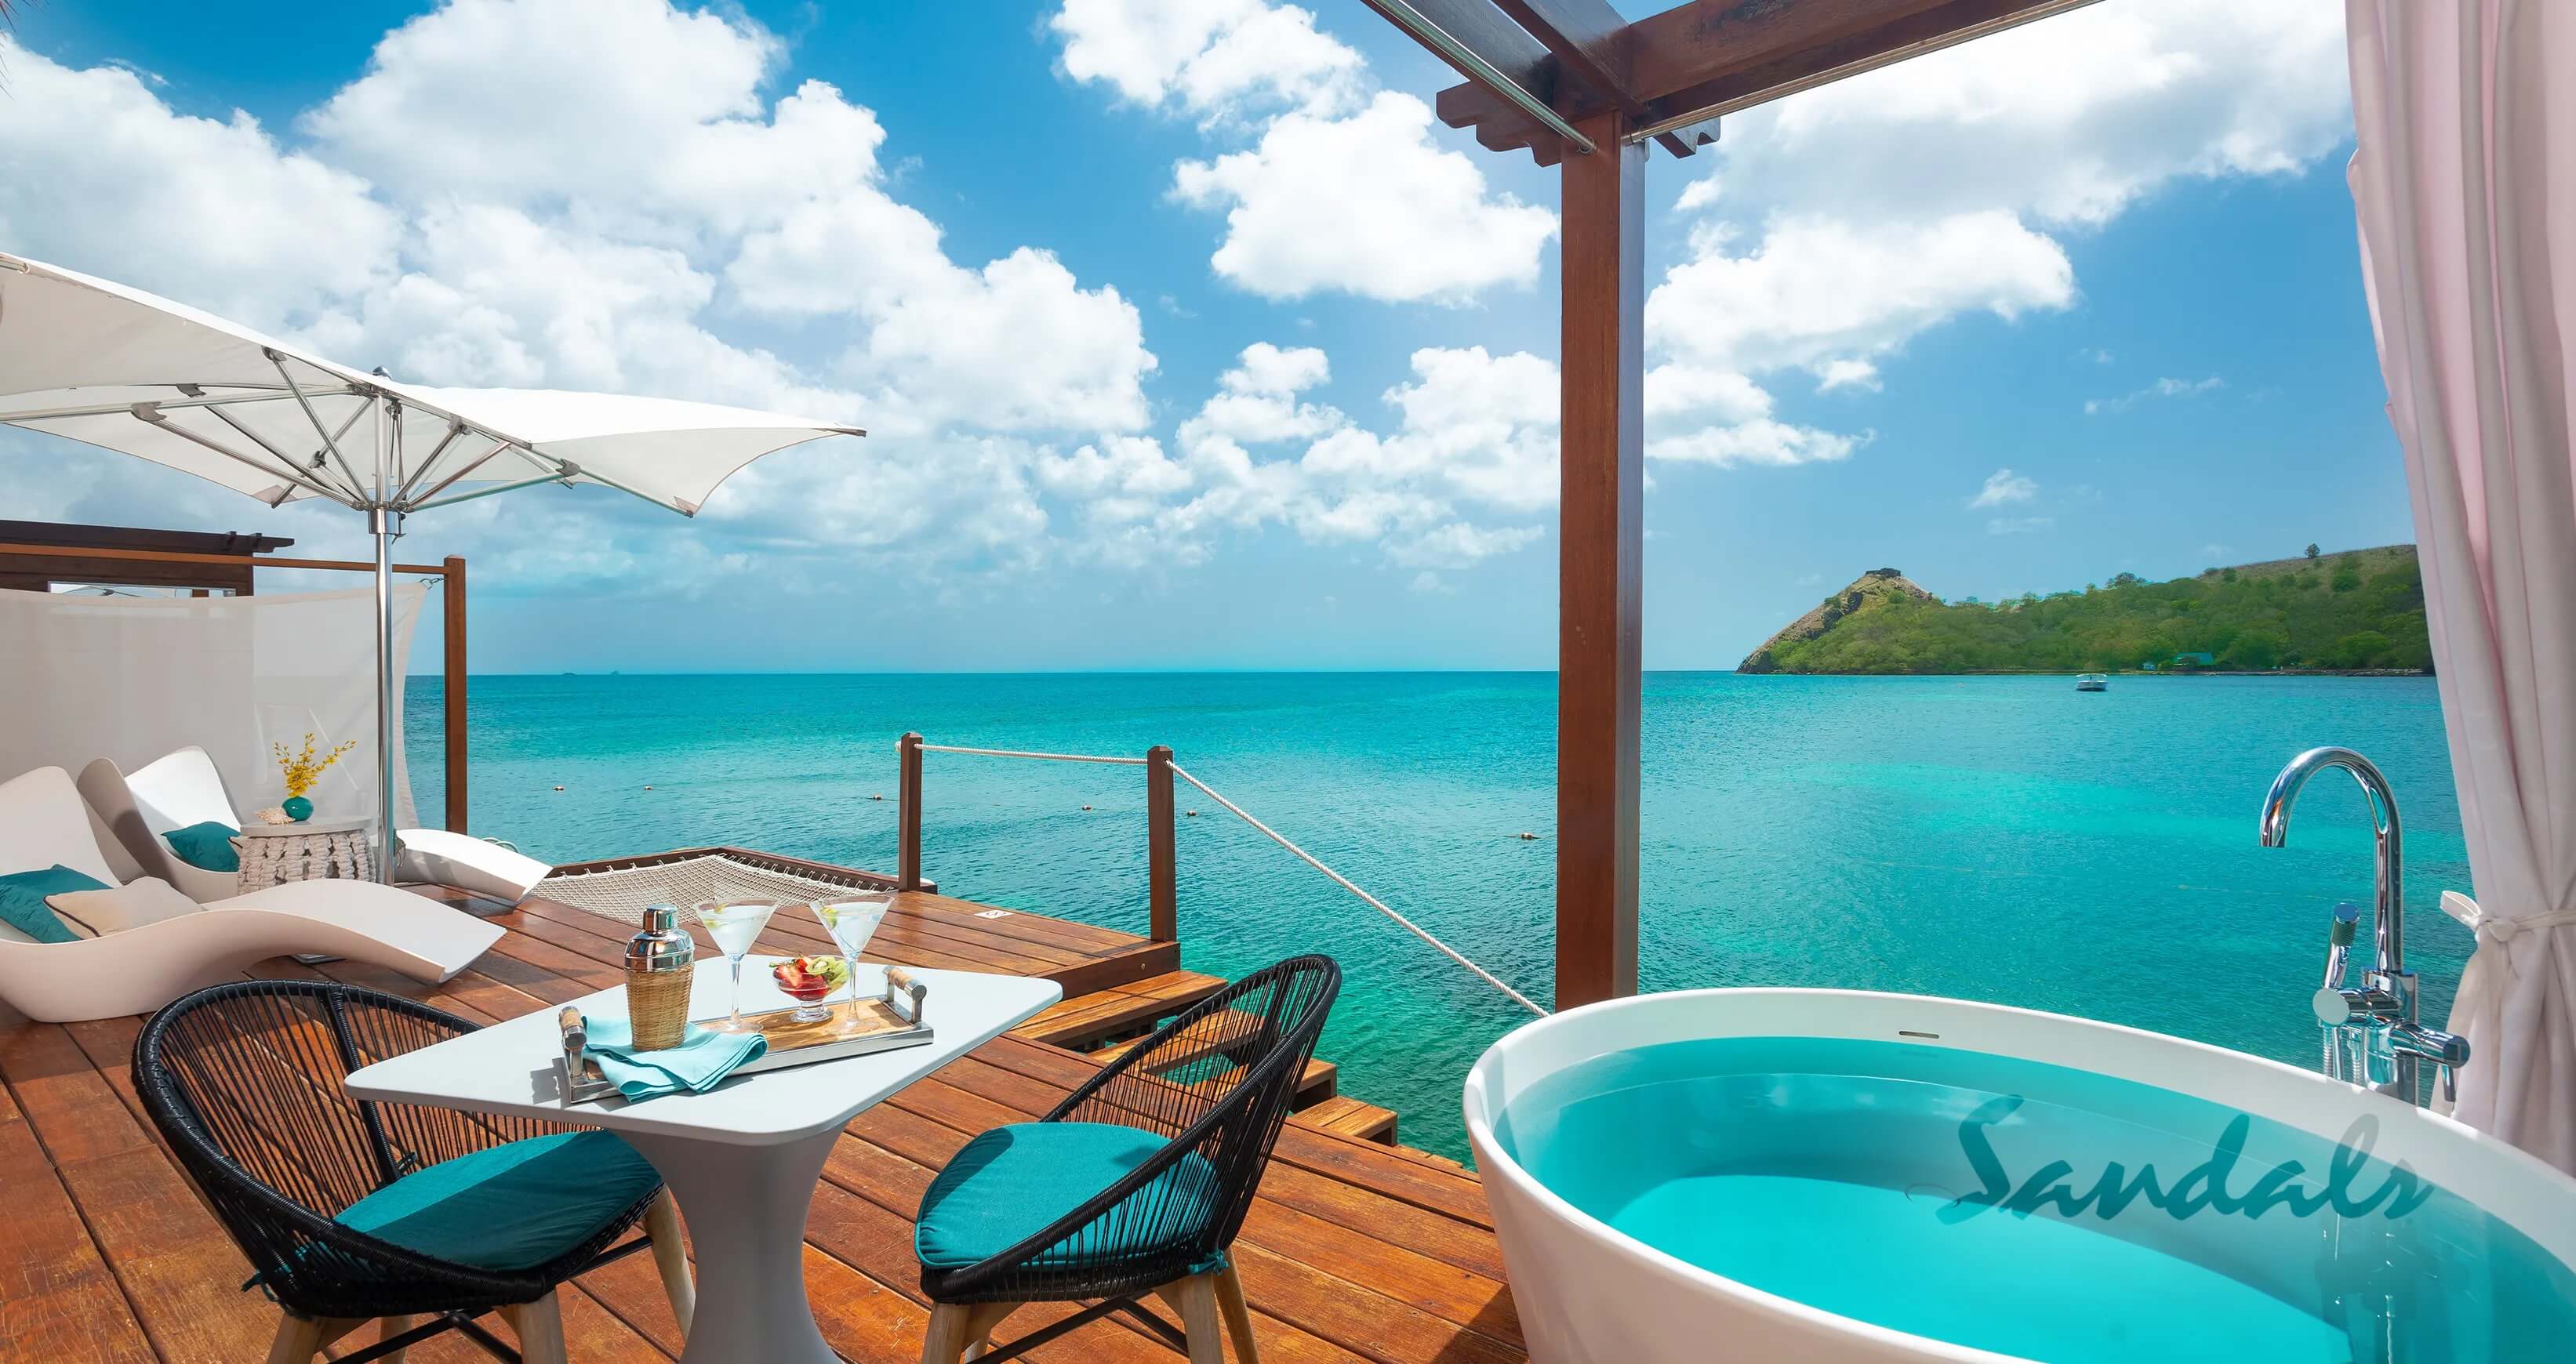 Plunge pool at overwater bungalow in Sandals Grande in St. Lucia.